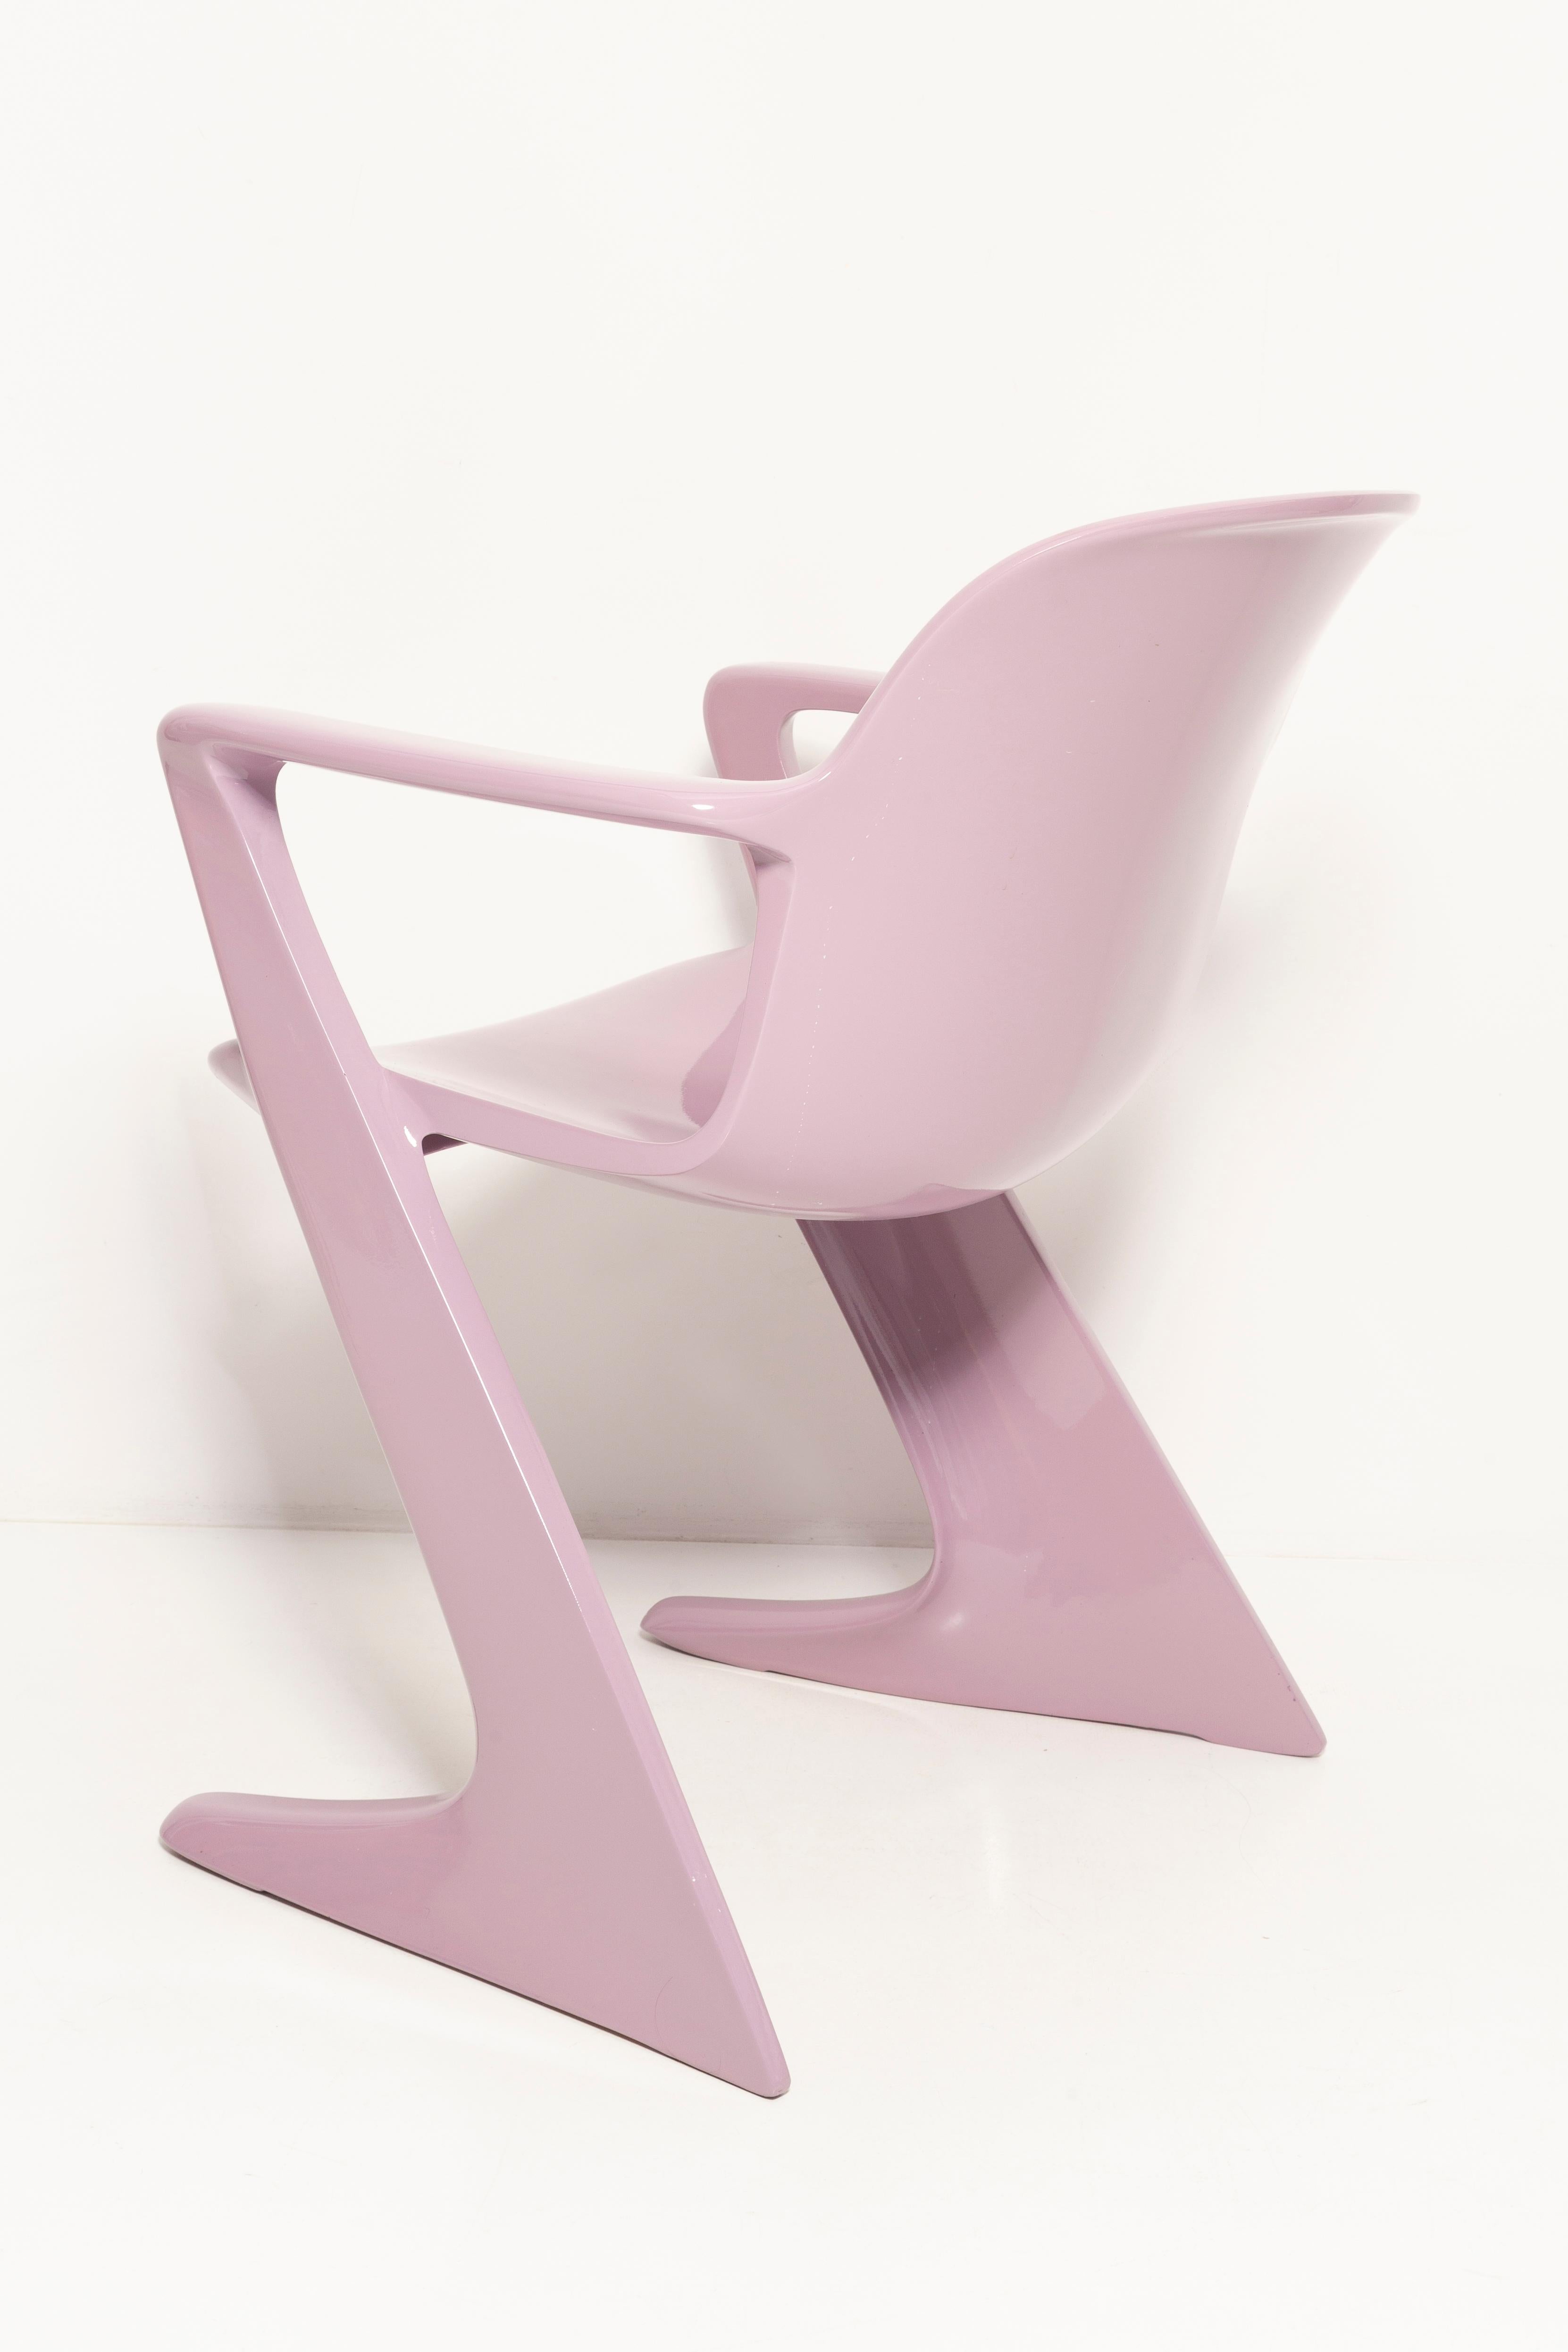 Mid Century Lavender Kangaroo Chair Designed by Ernst Moeckl, Germany, 1968 For Sale 2